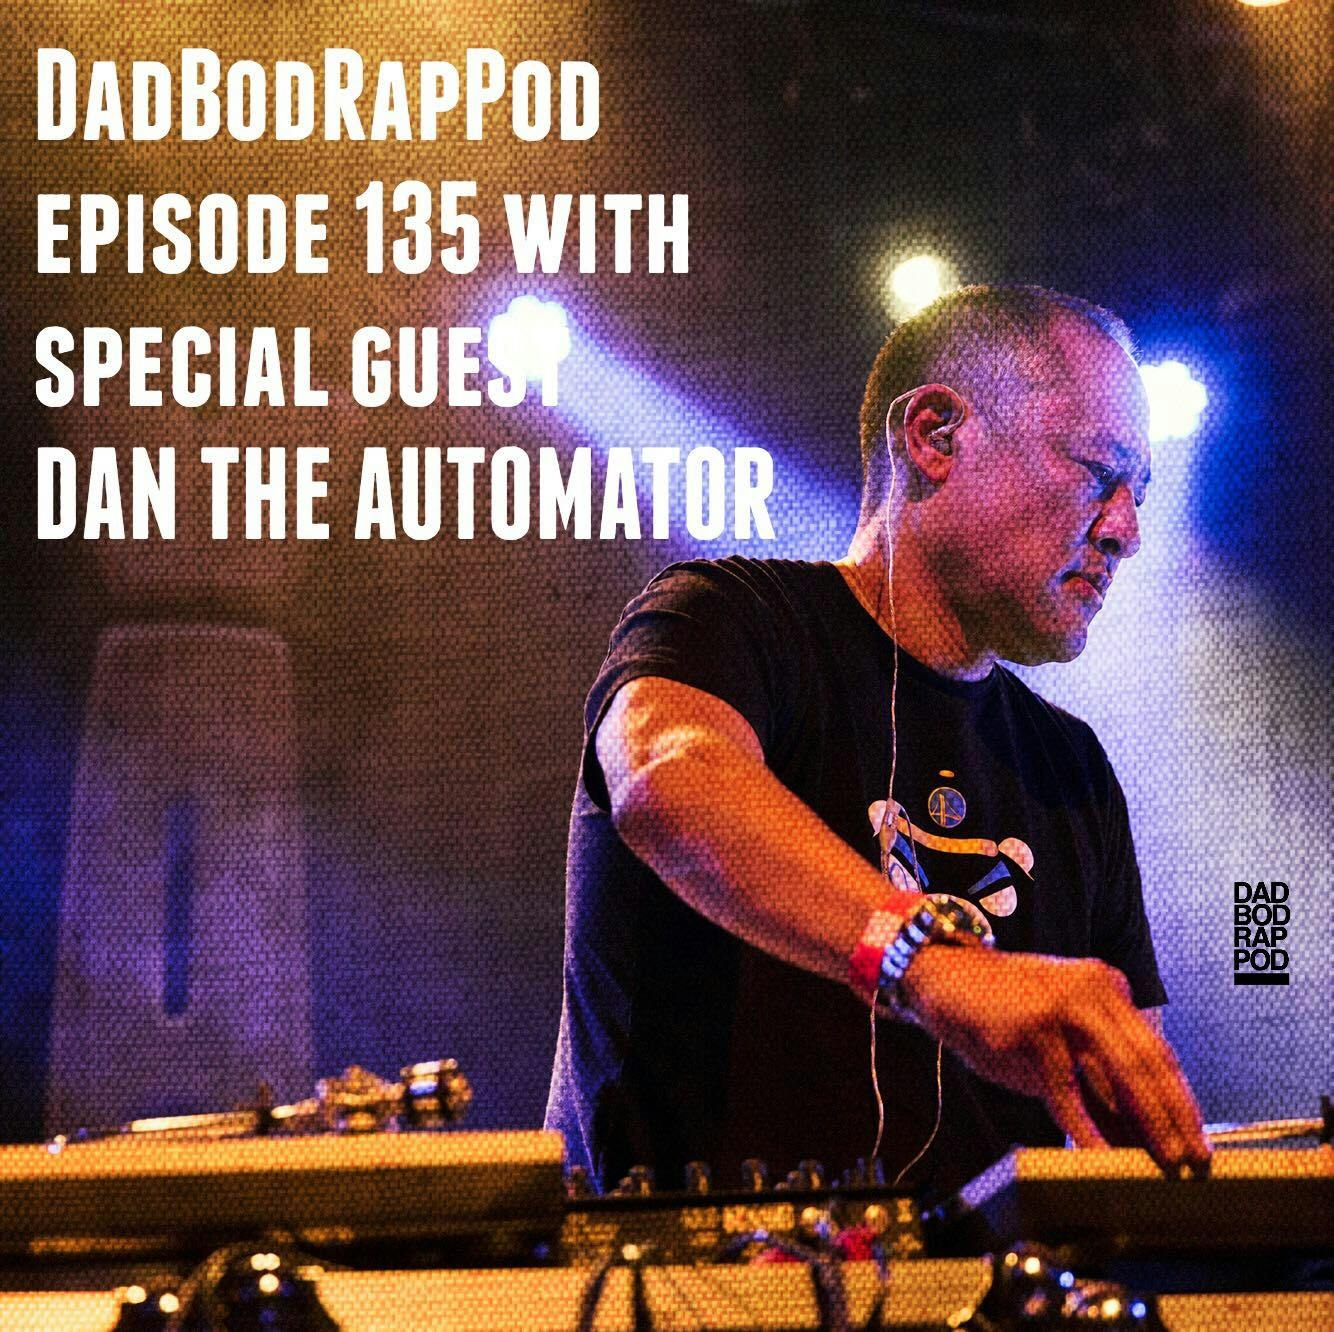 Episode 135- Automated Teller with guest Dan The Automator